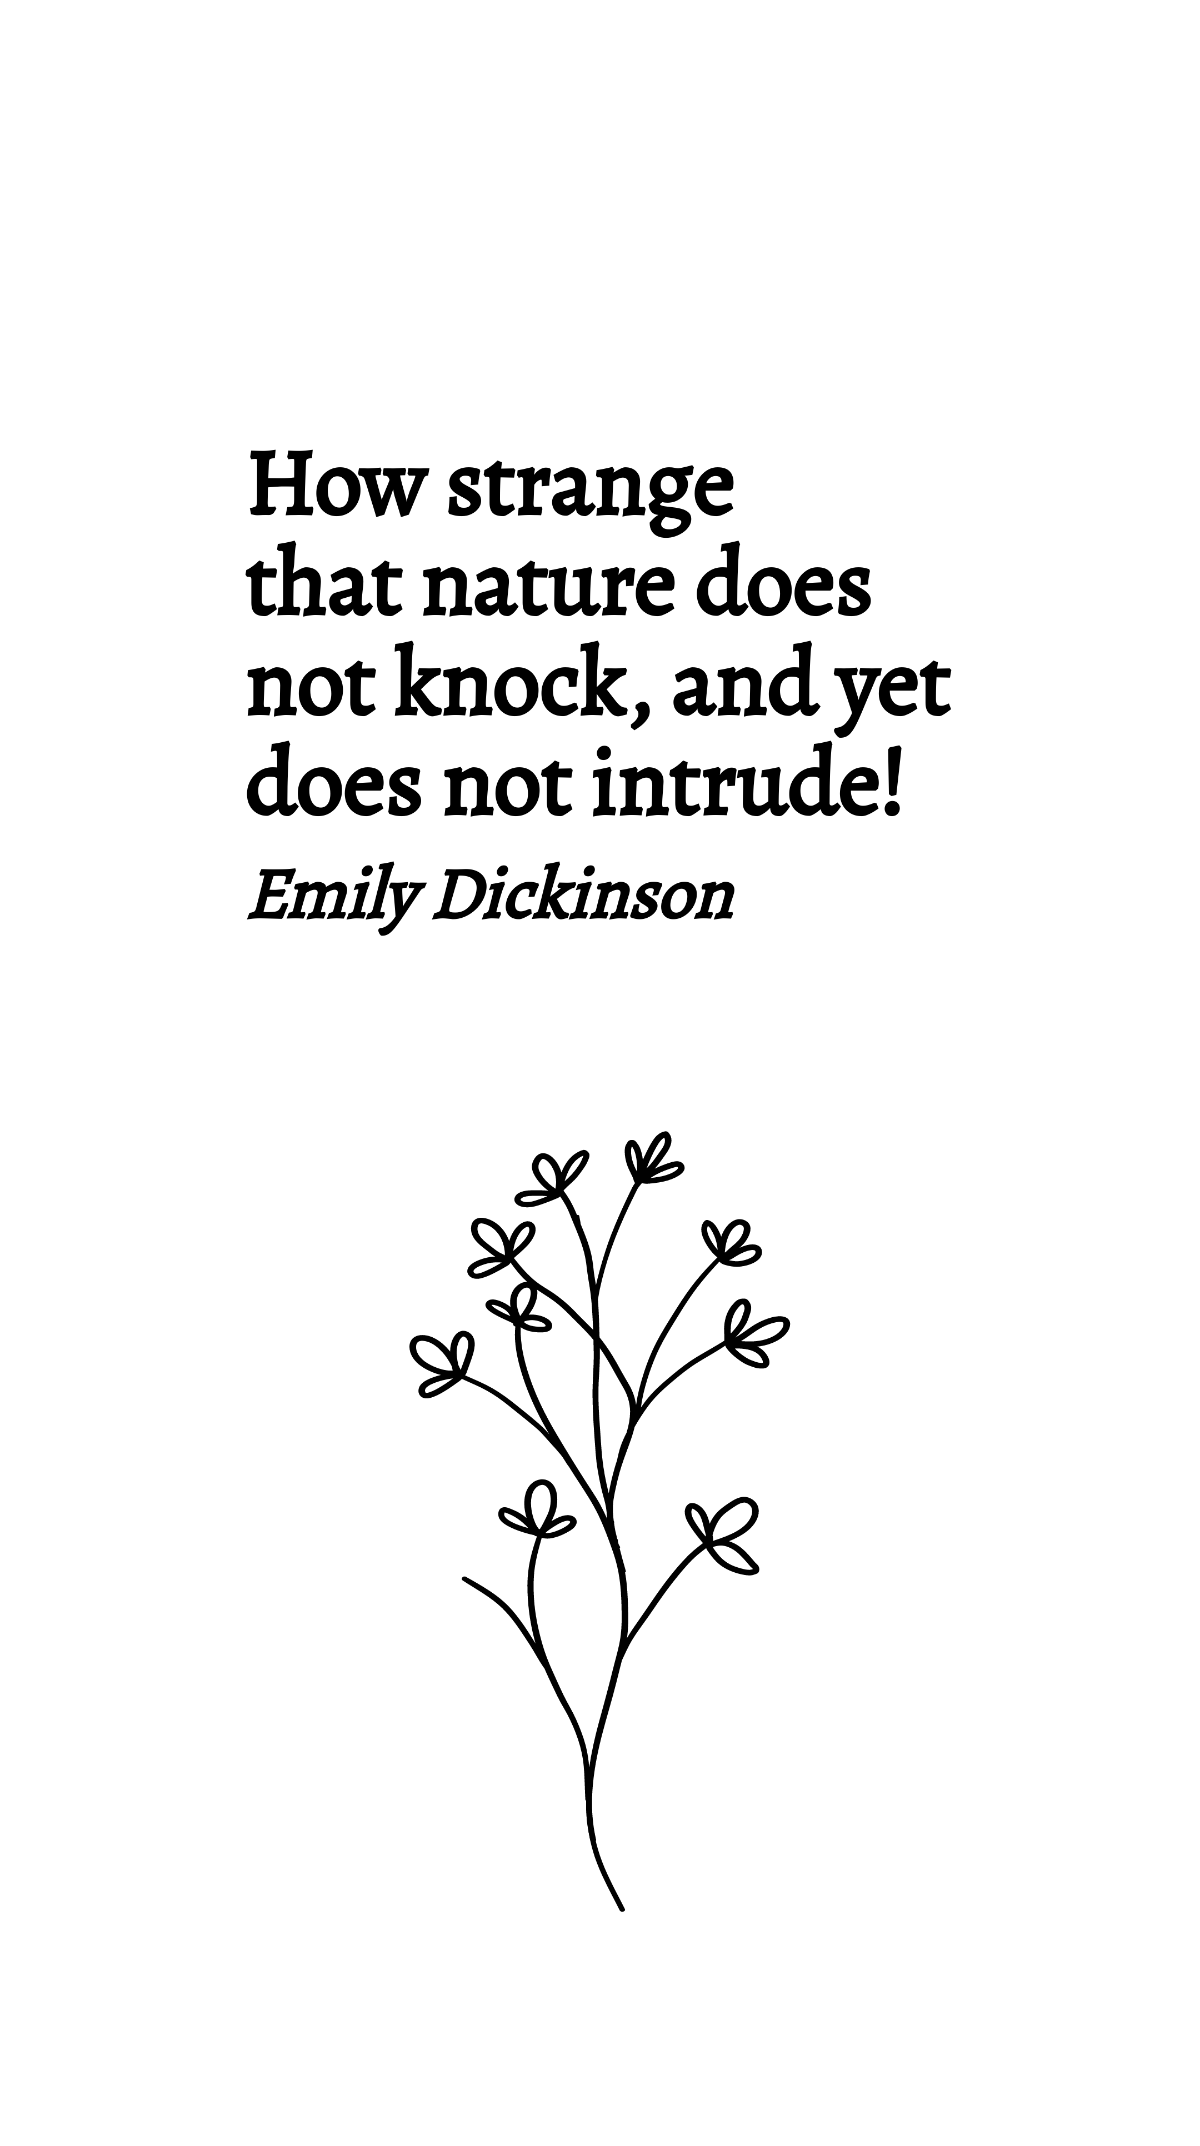 Free Emily Dickinson - How strange that nature does not knock, and yet does not intrude! Template